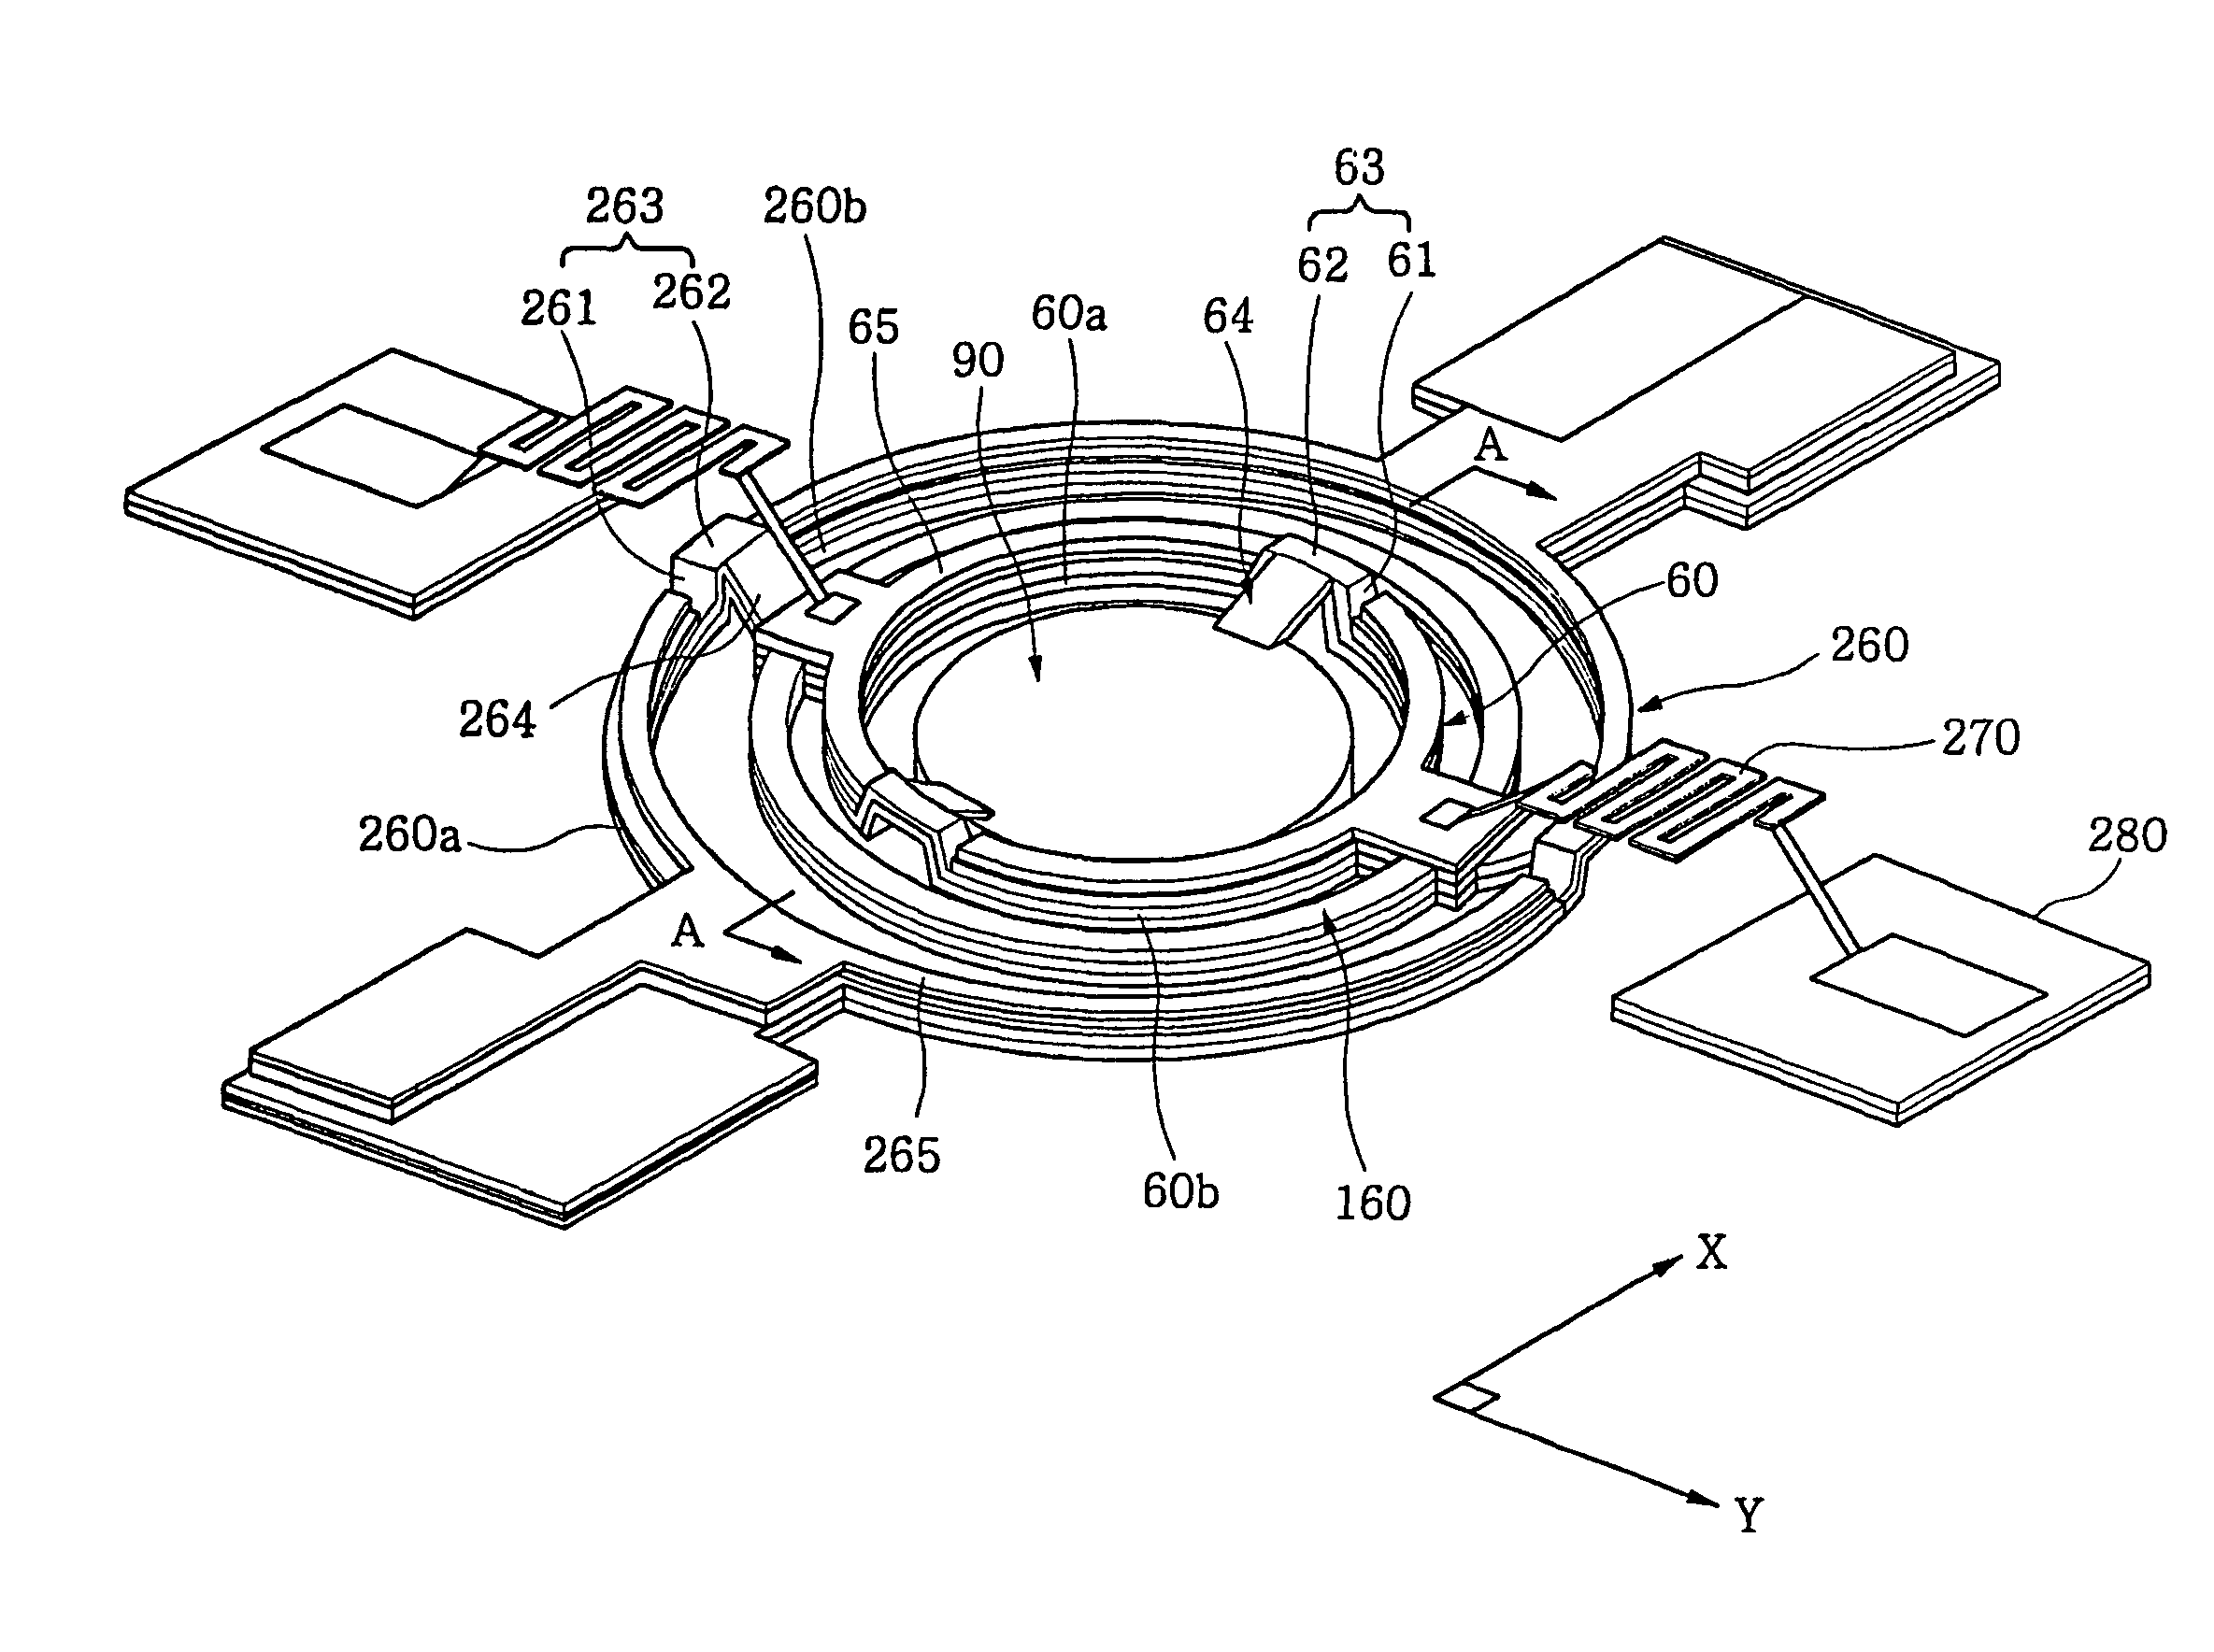 Micro piezoelectric actuator and method for fabricating same